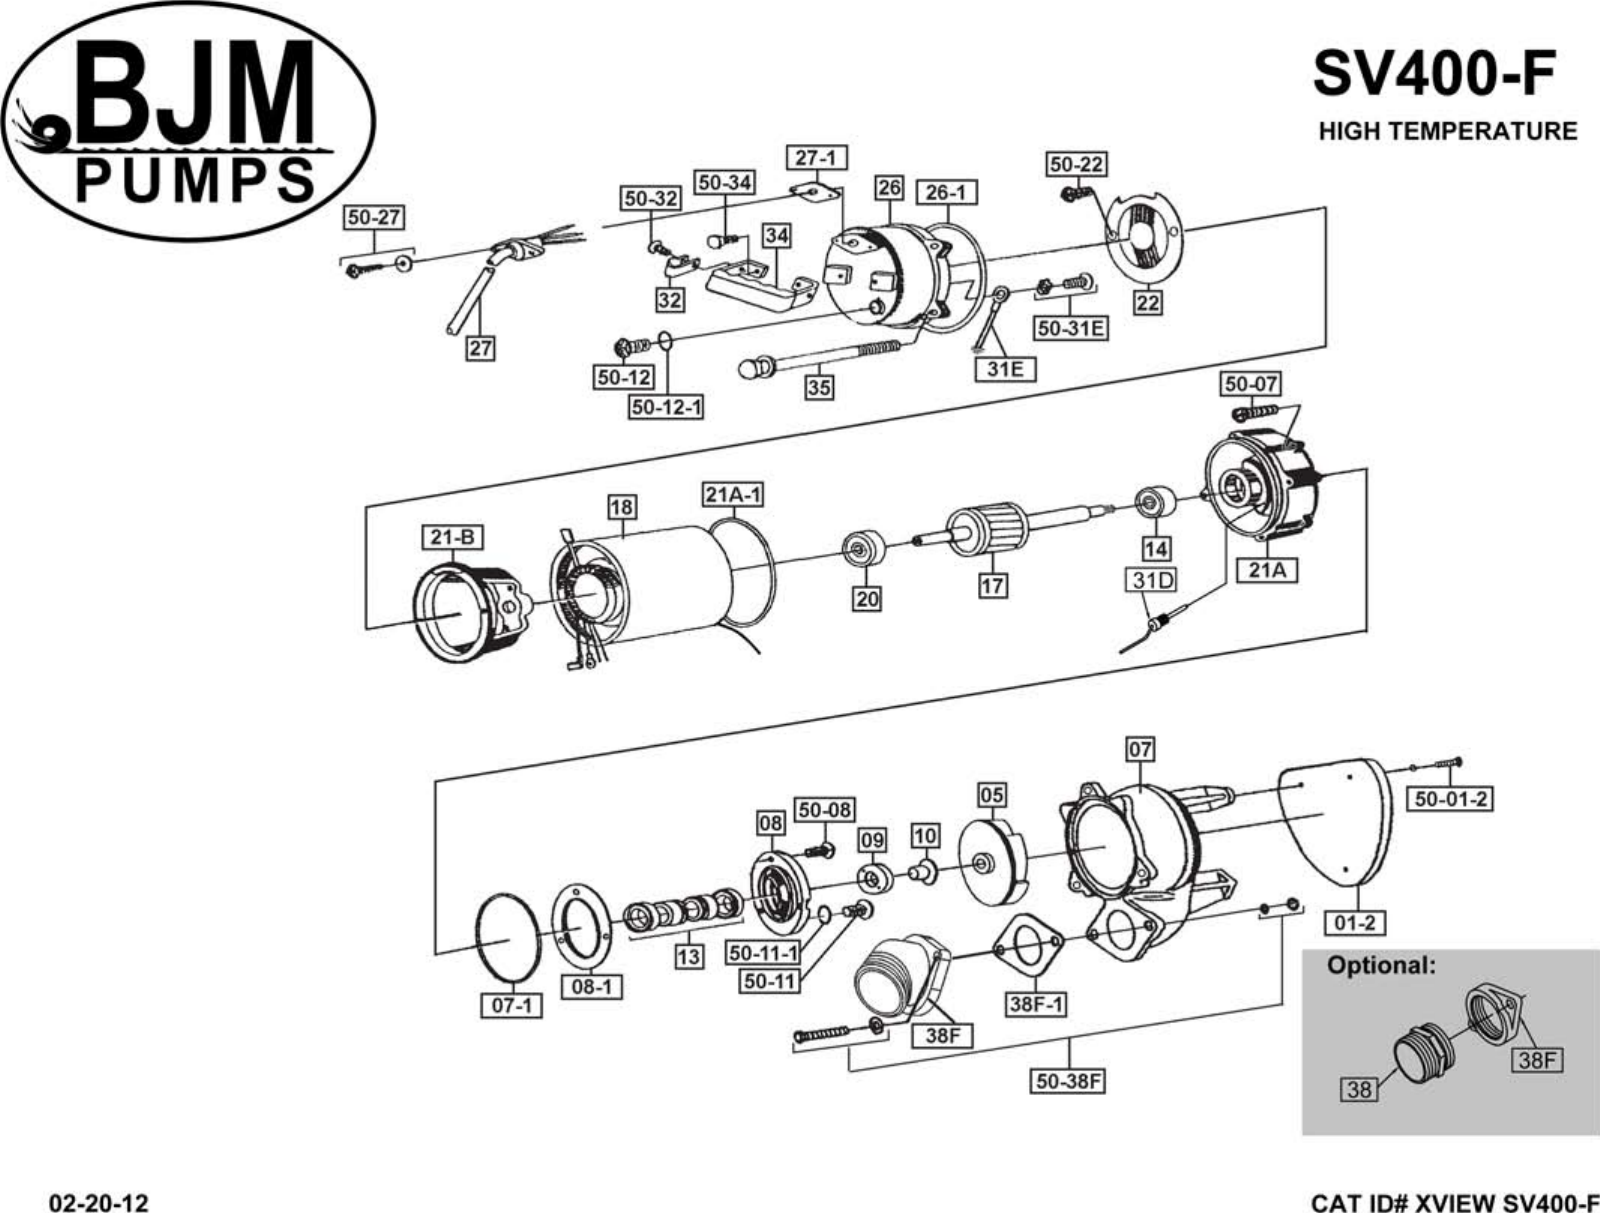 Page 1 of 3 - 136432 6 Bjm Svf Series Exploded View User Manual